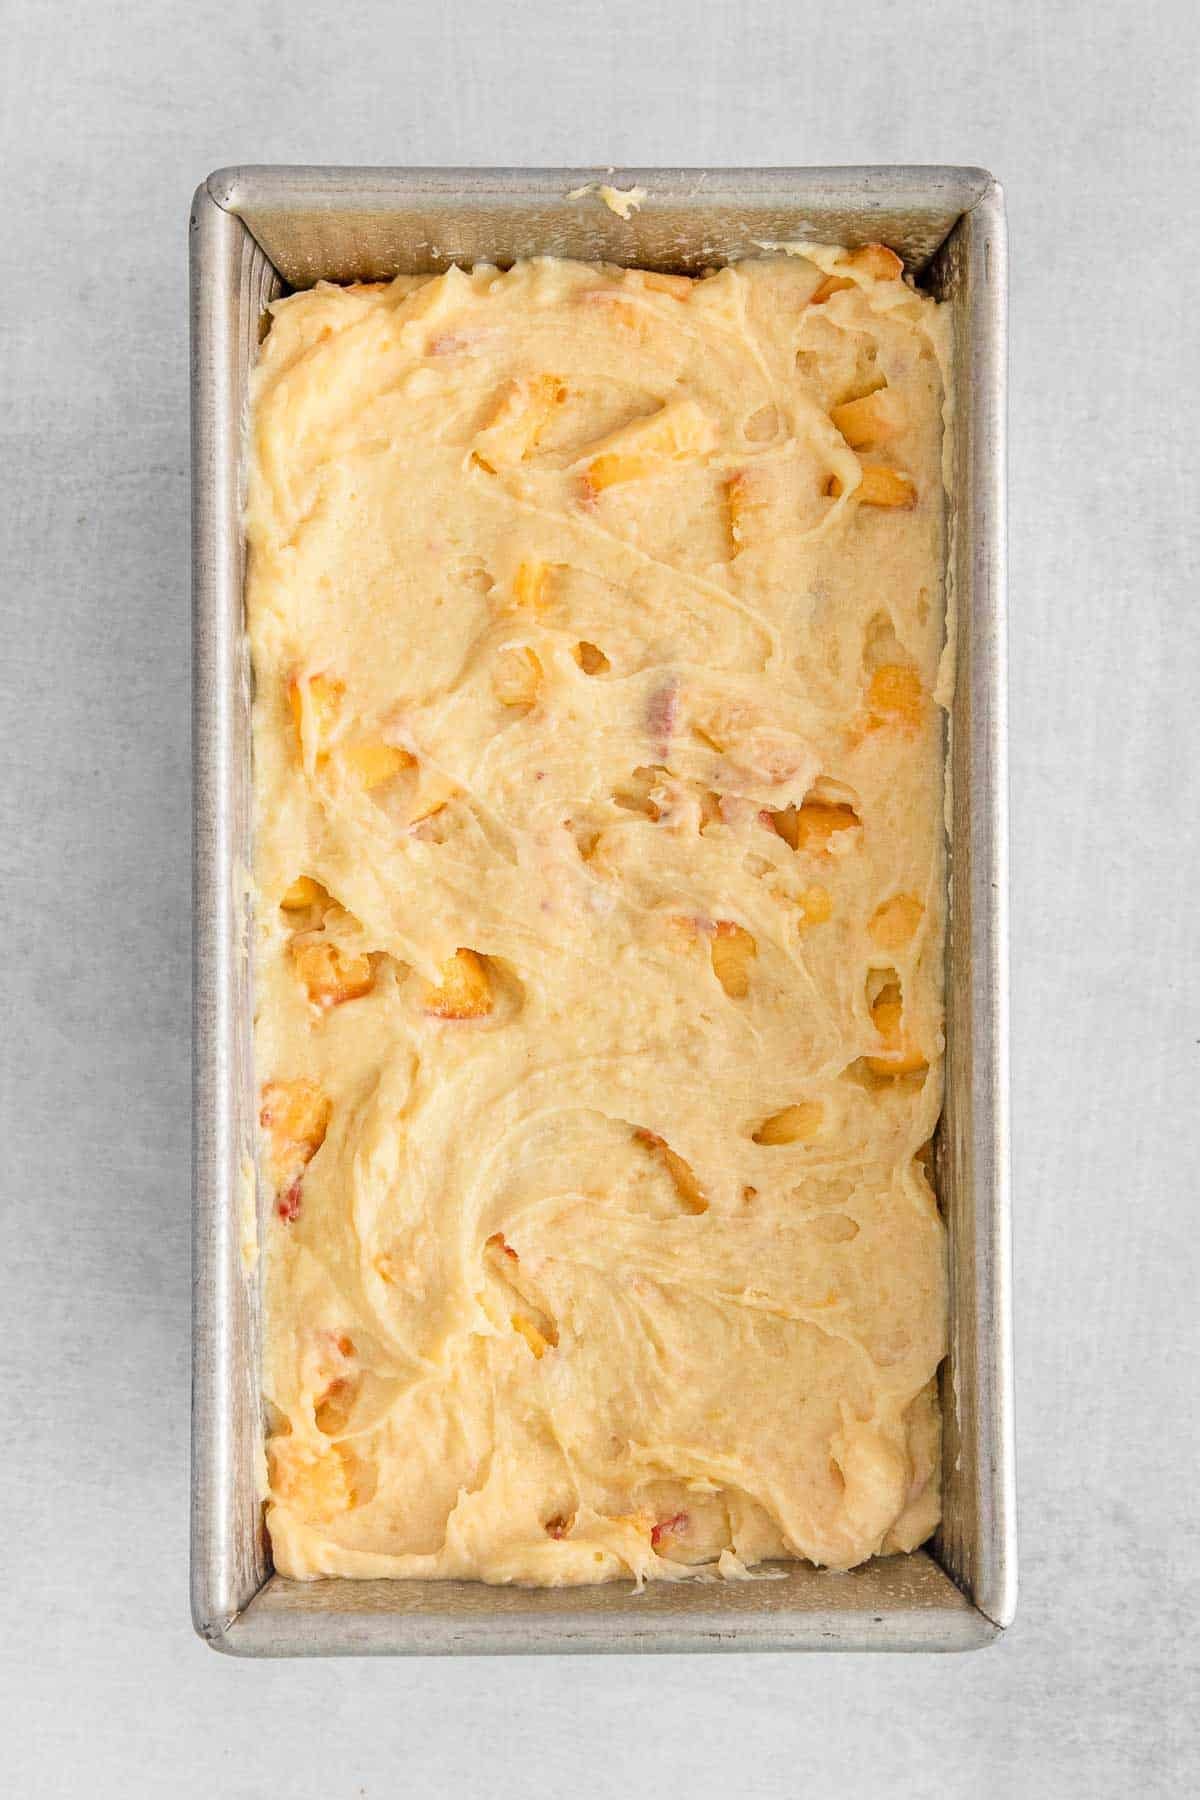 Baking pan containing peach cobbler pound cake batter with peach slices.